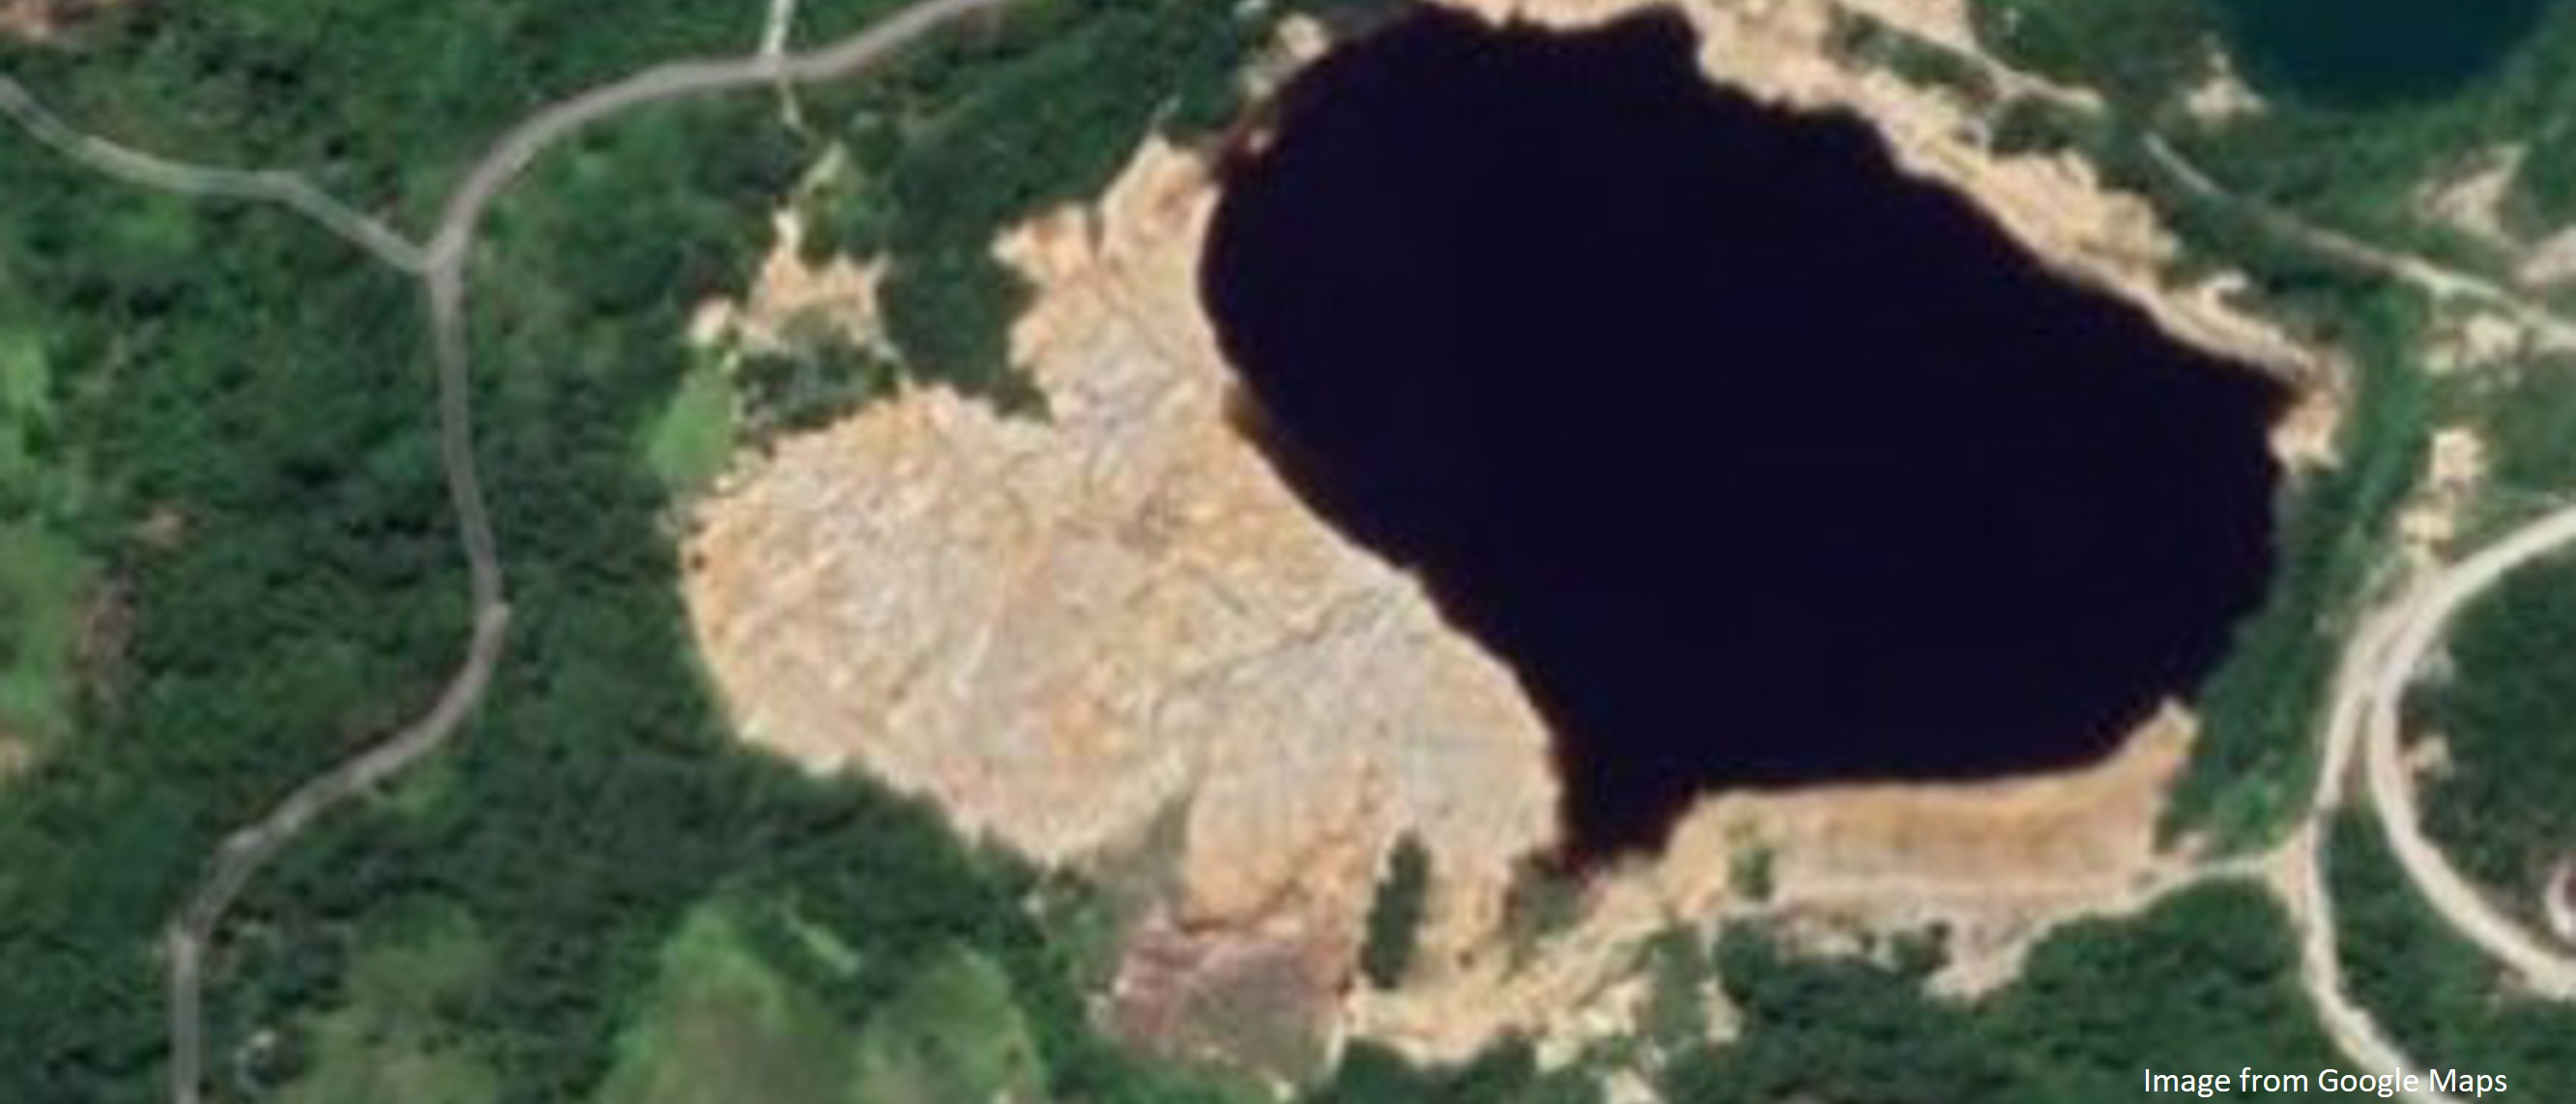 Satellite photo of a mine location in the Philippines